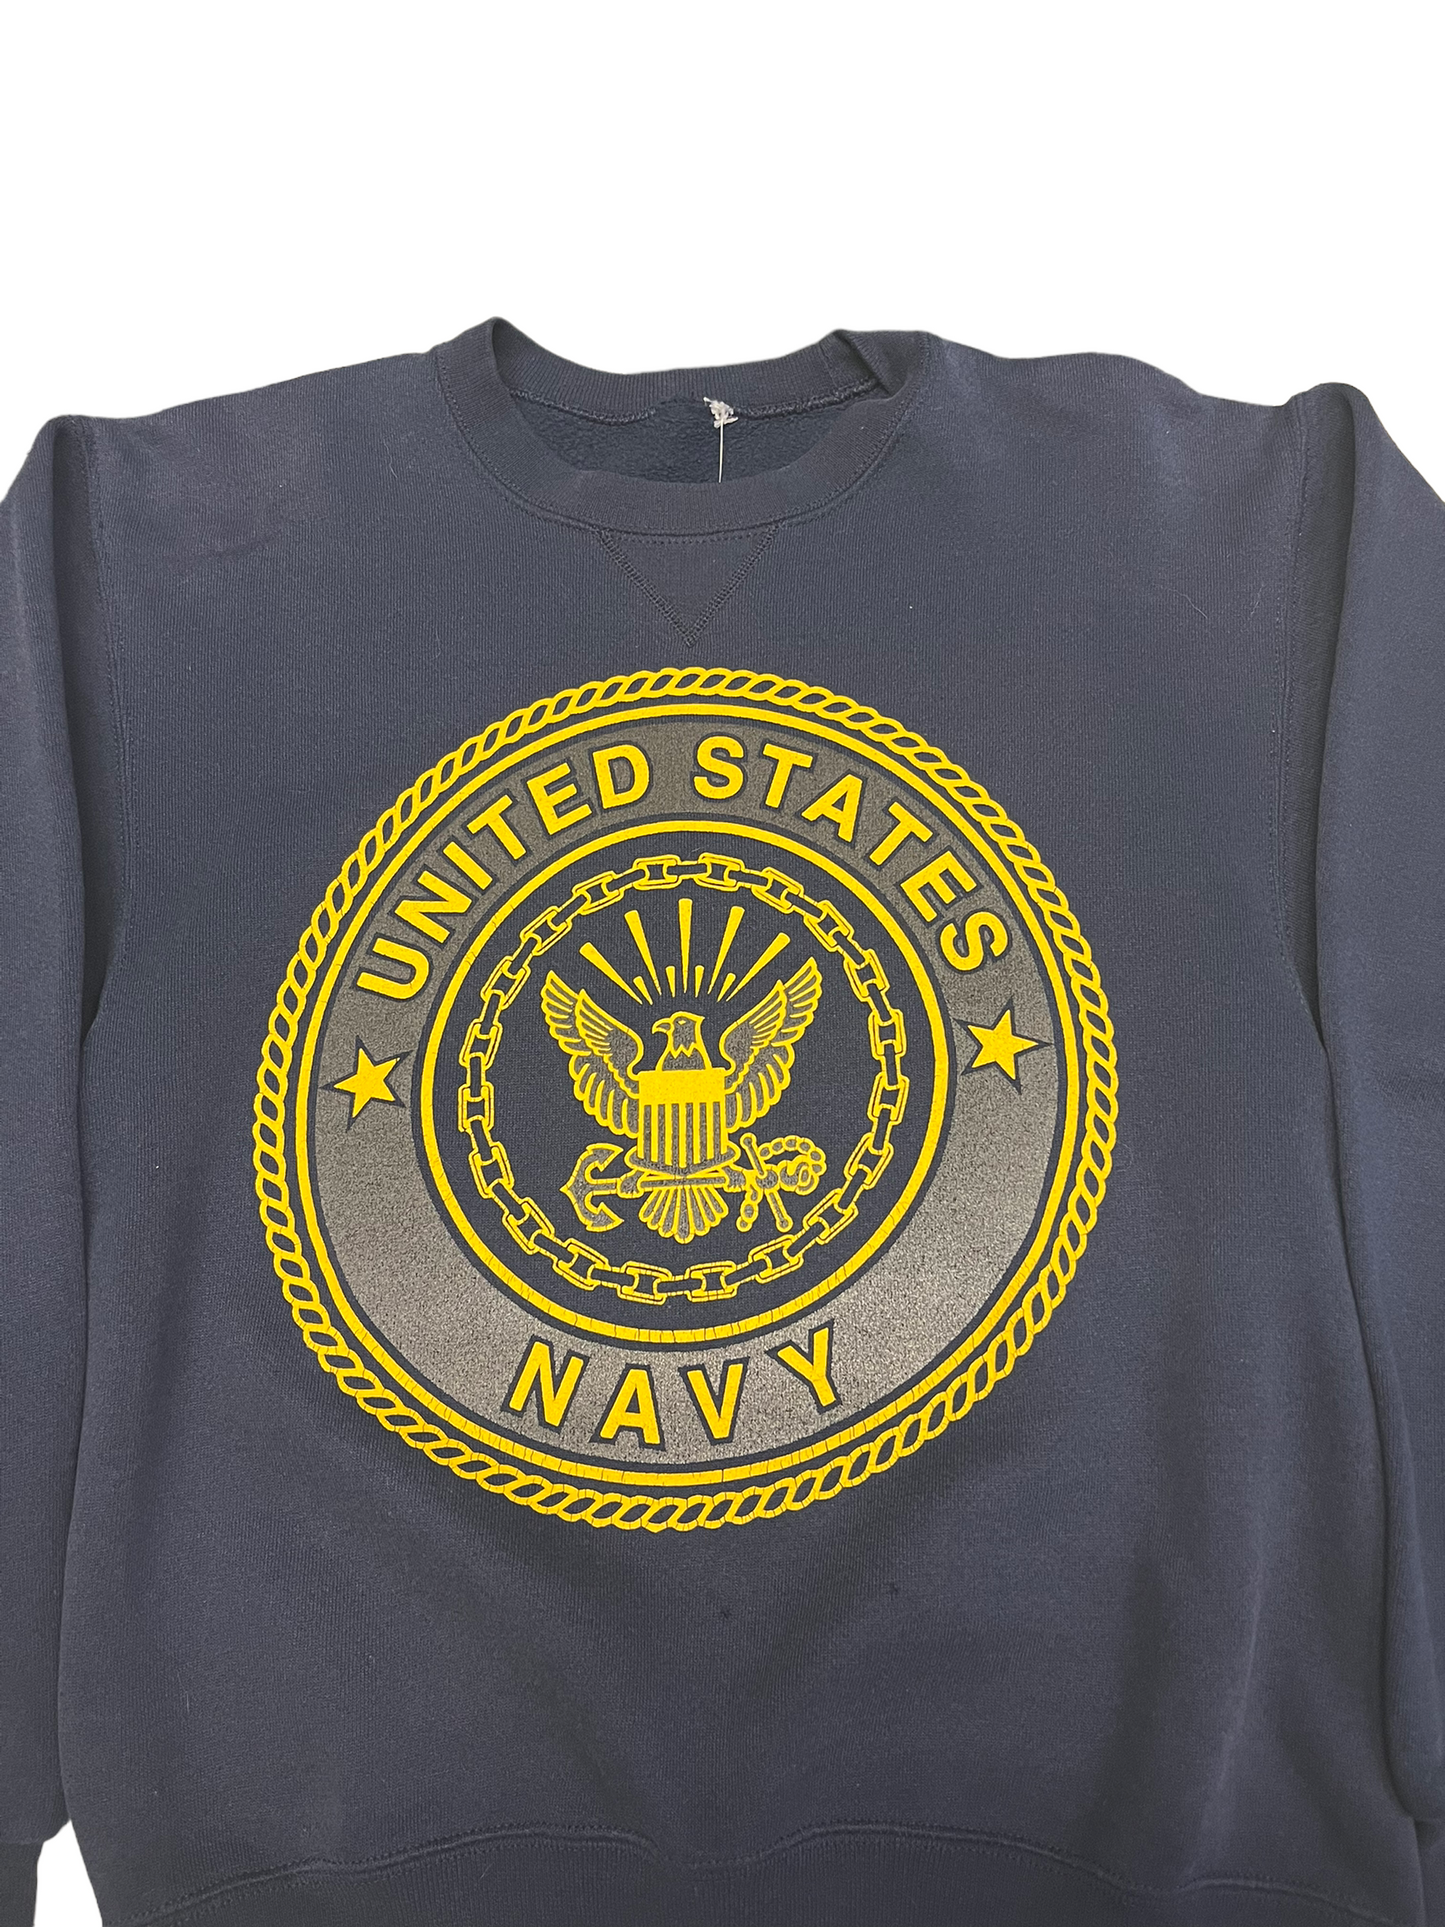 (S) Vintage Navy Double Sided Crewneck